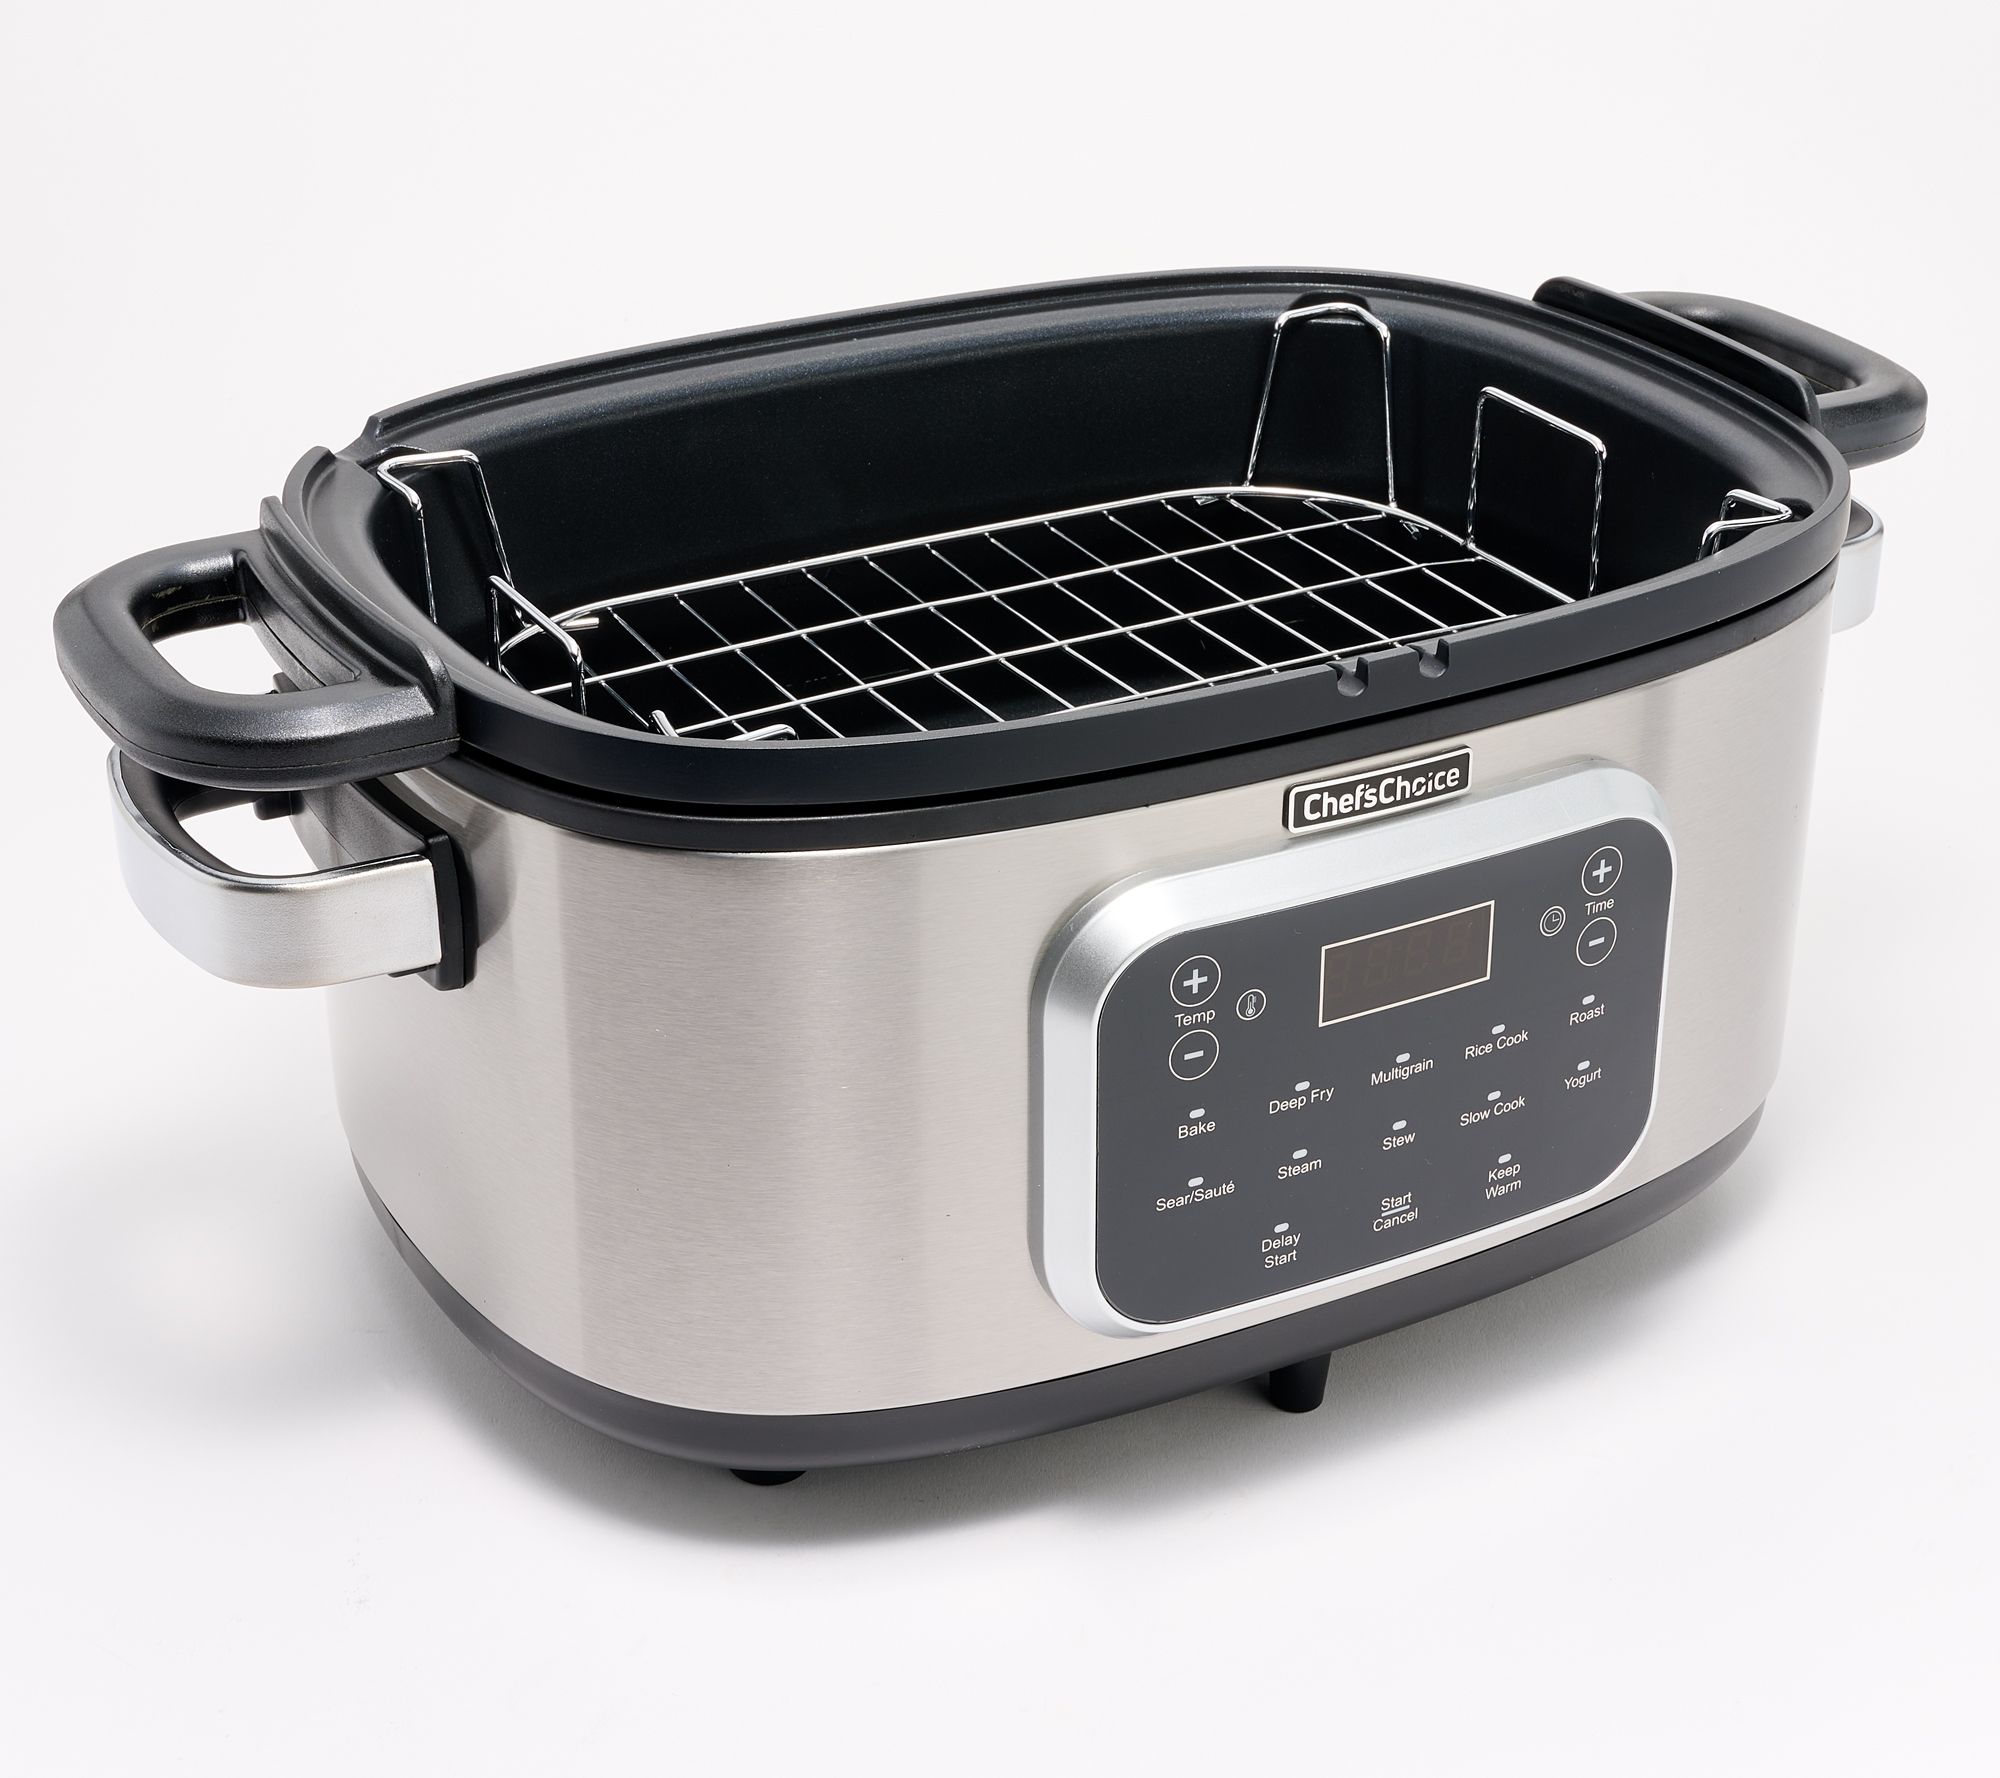 Ninja 3-in-1 6 qt. Nonstick Cooking System with Cookbook and Accessories  with David Venable 